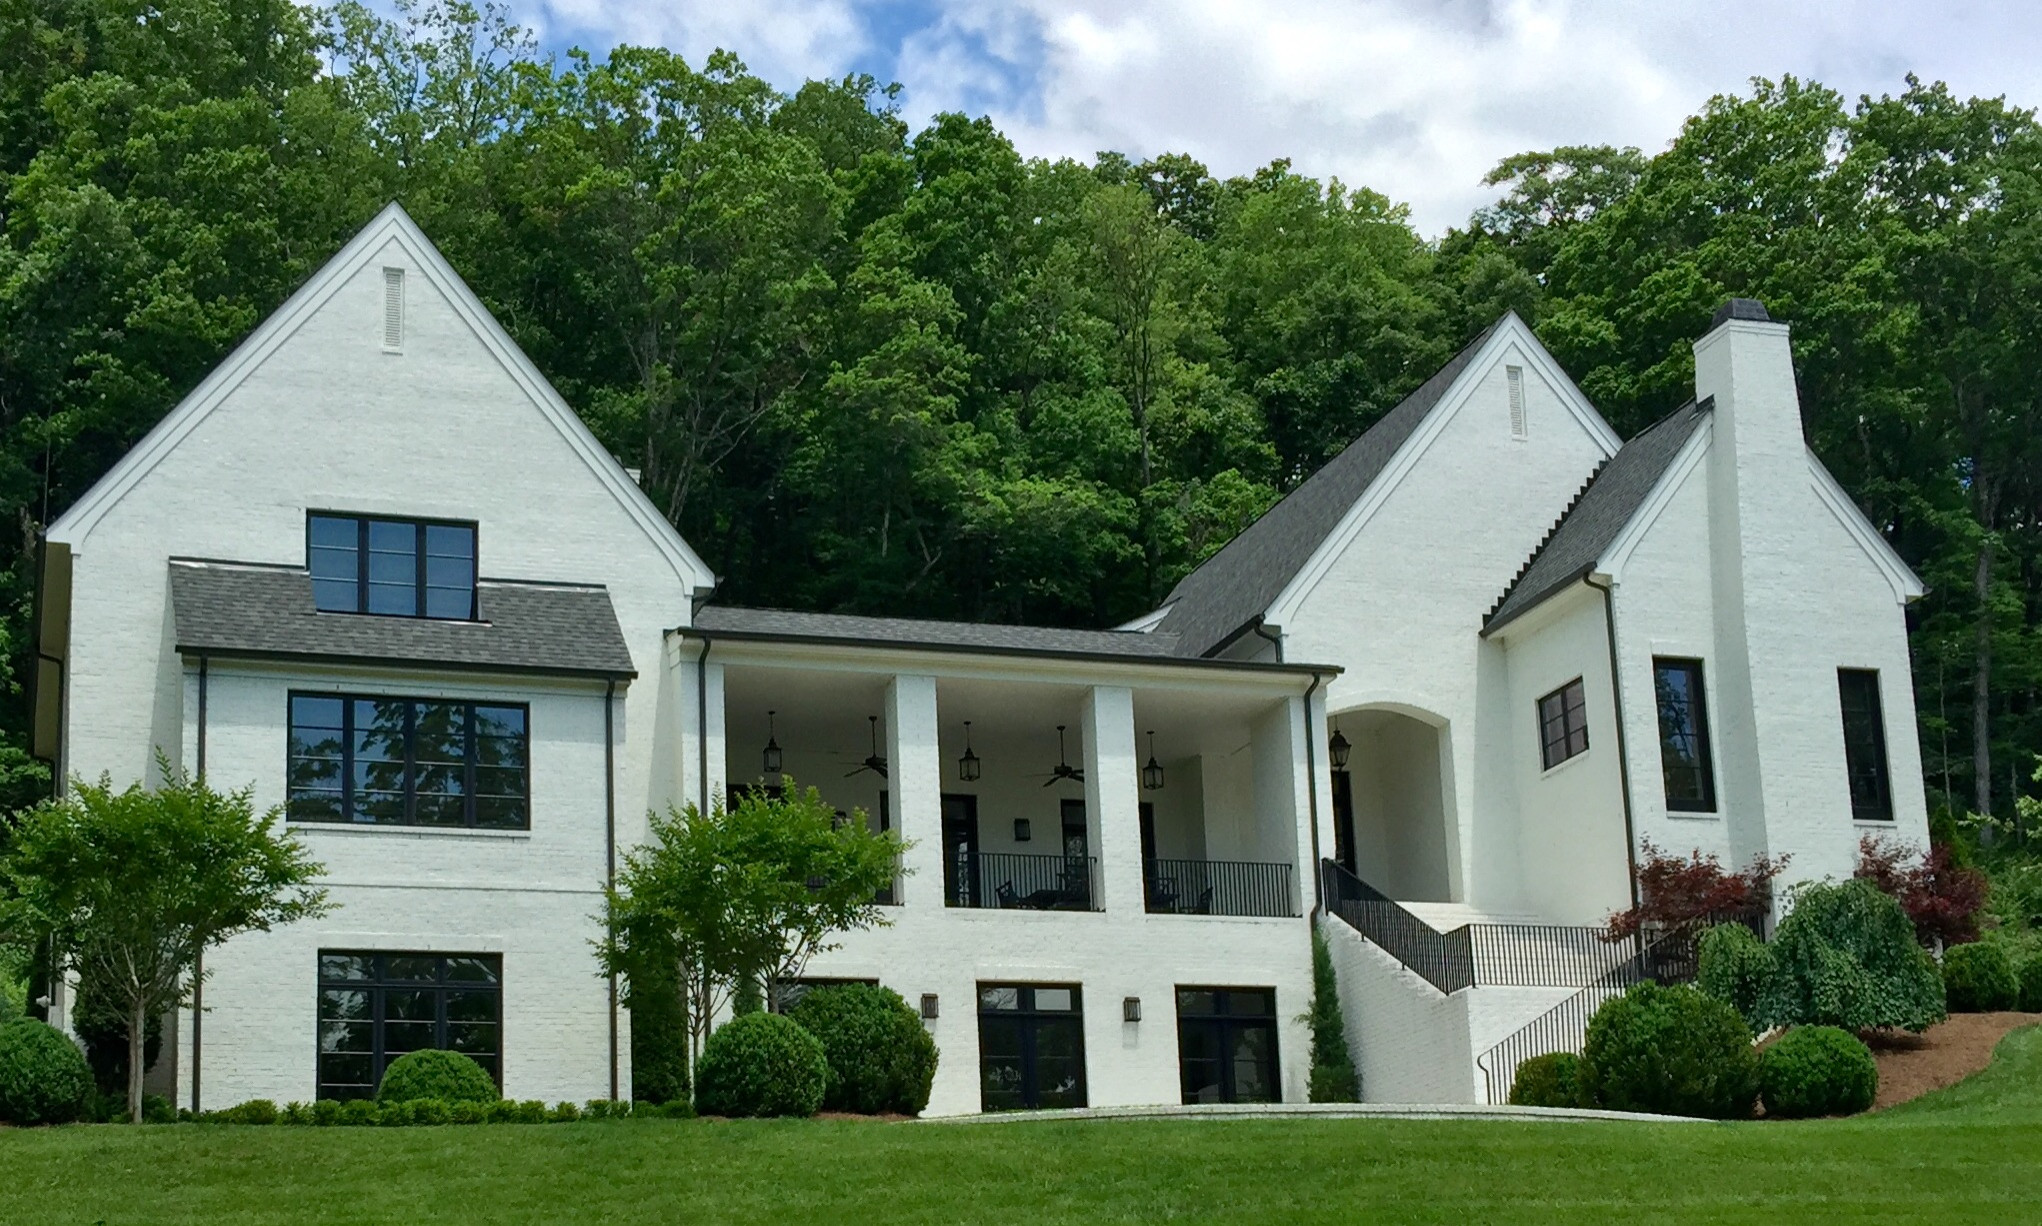 Contemporary Style with Classic Landscape nuances - Franklin Tn